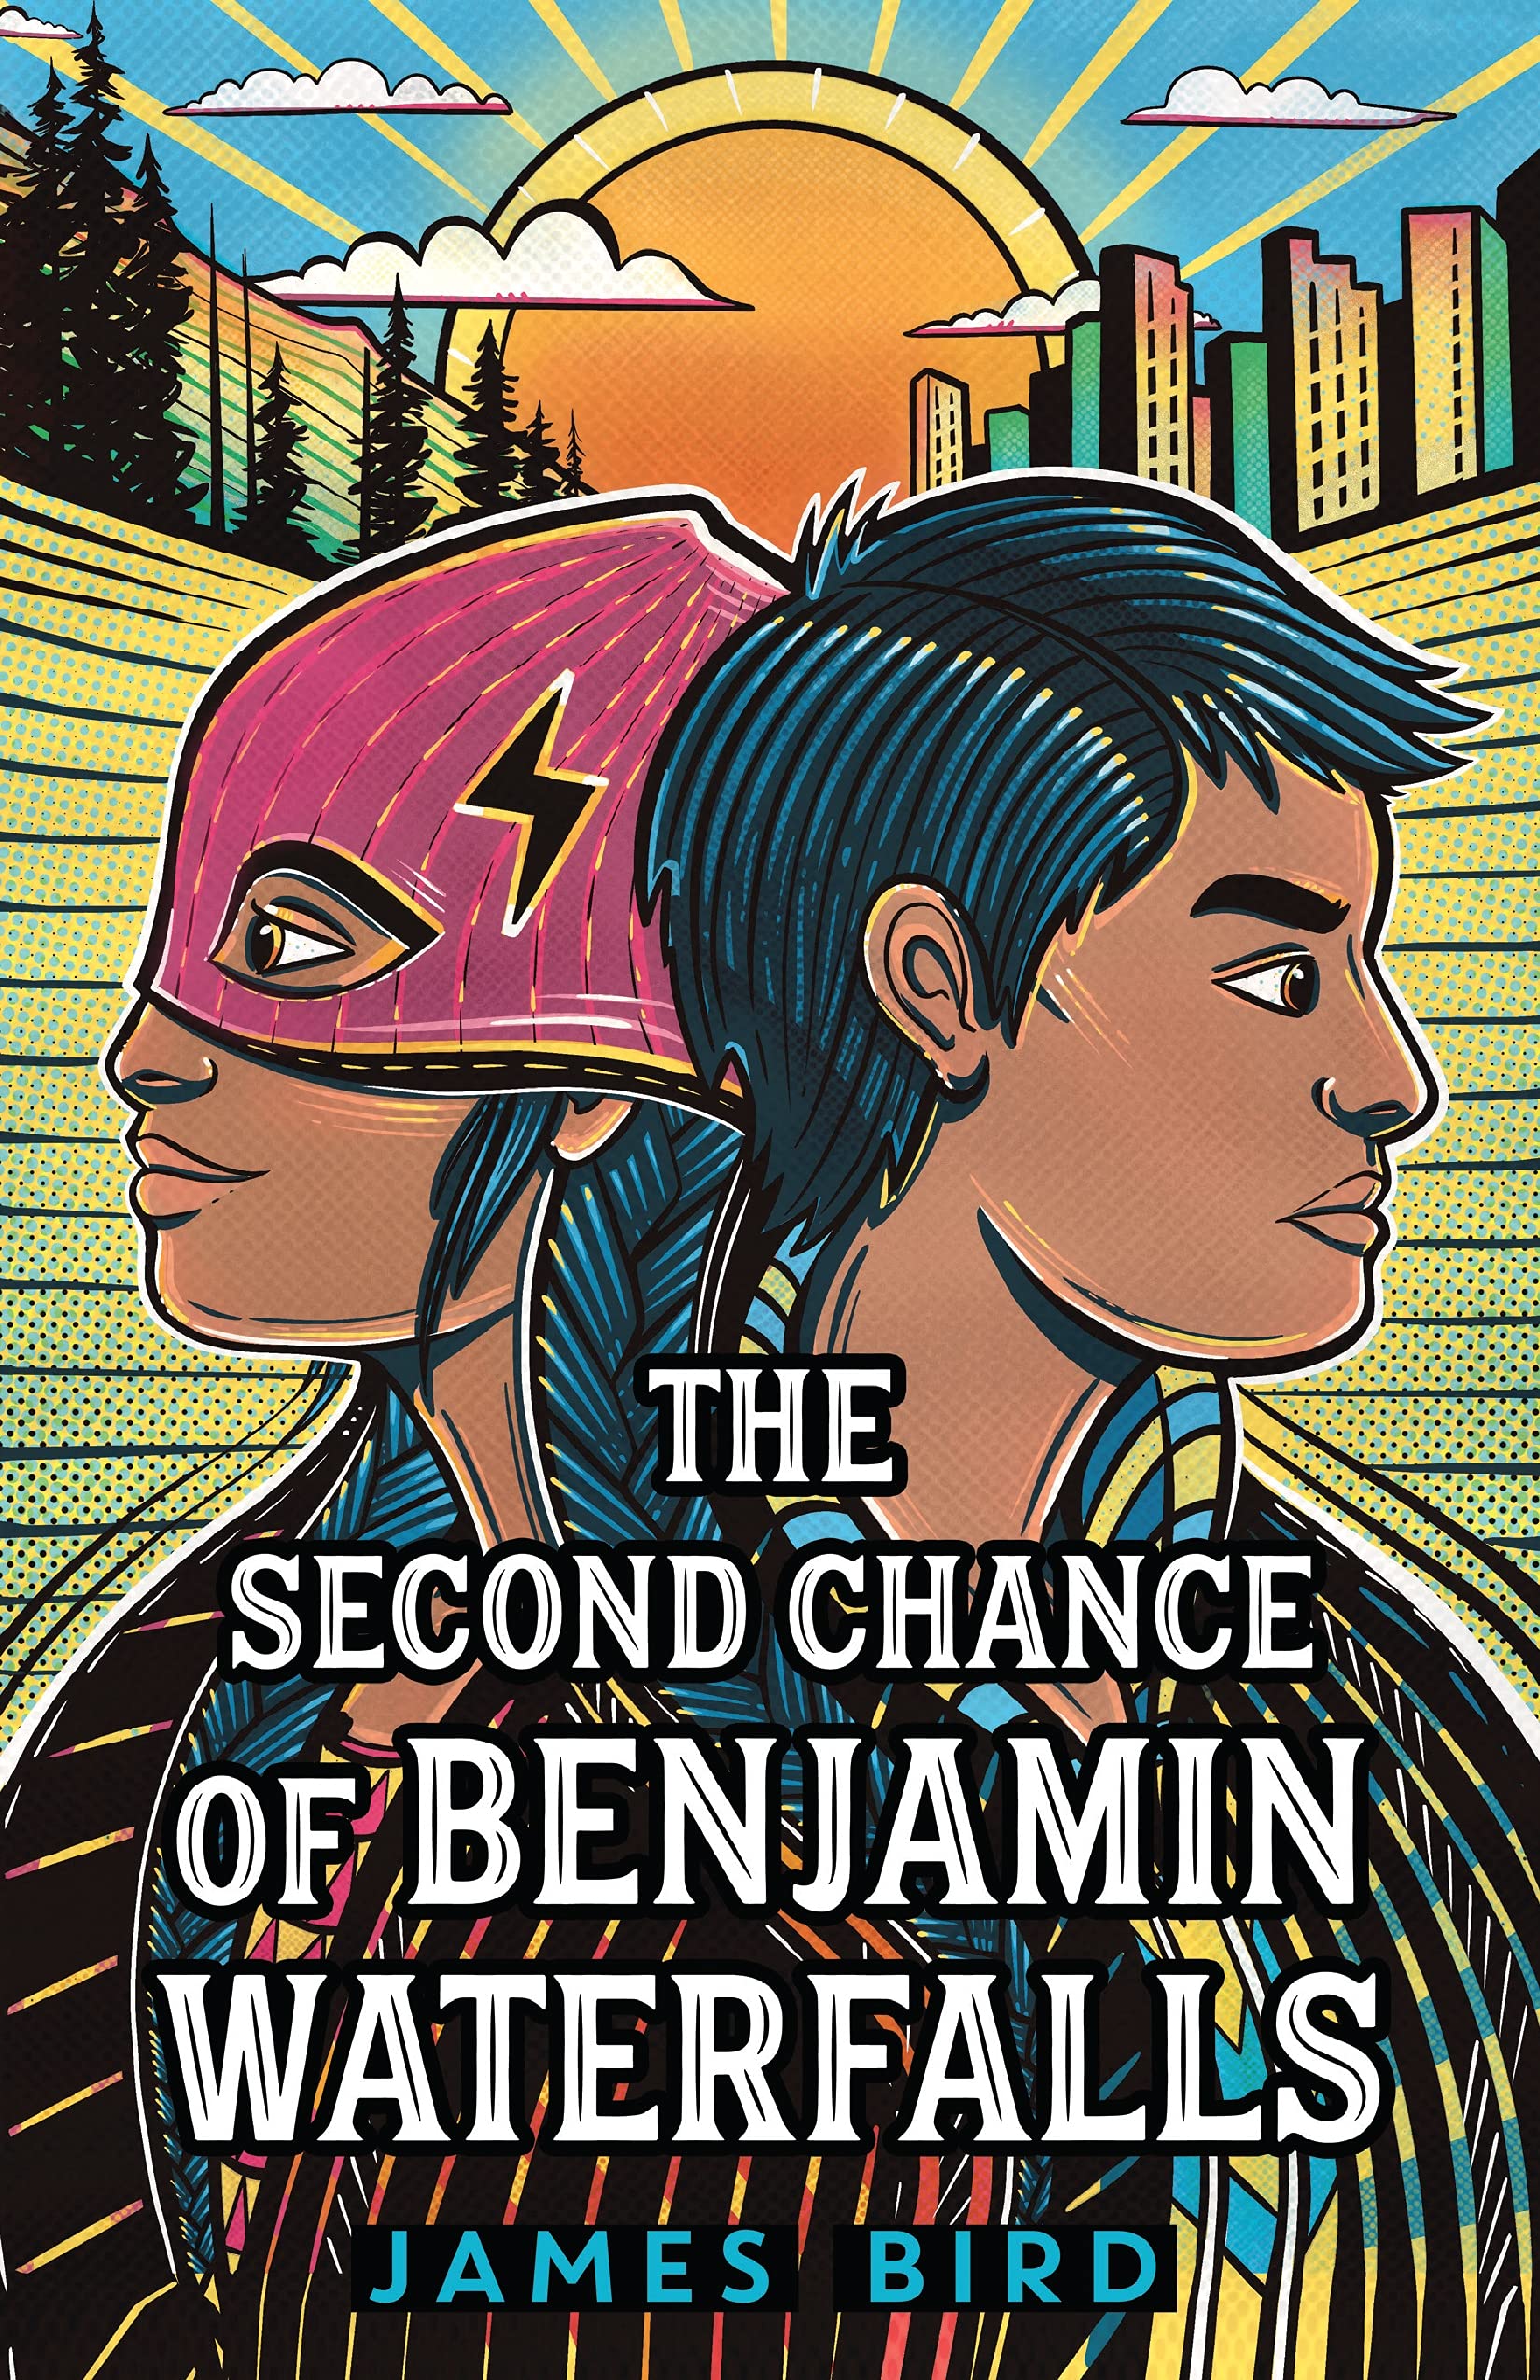 The Second Chance of Benjamin Waterfalls by James Bird cover